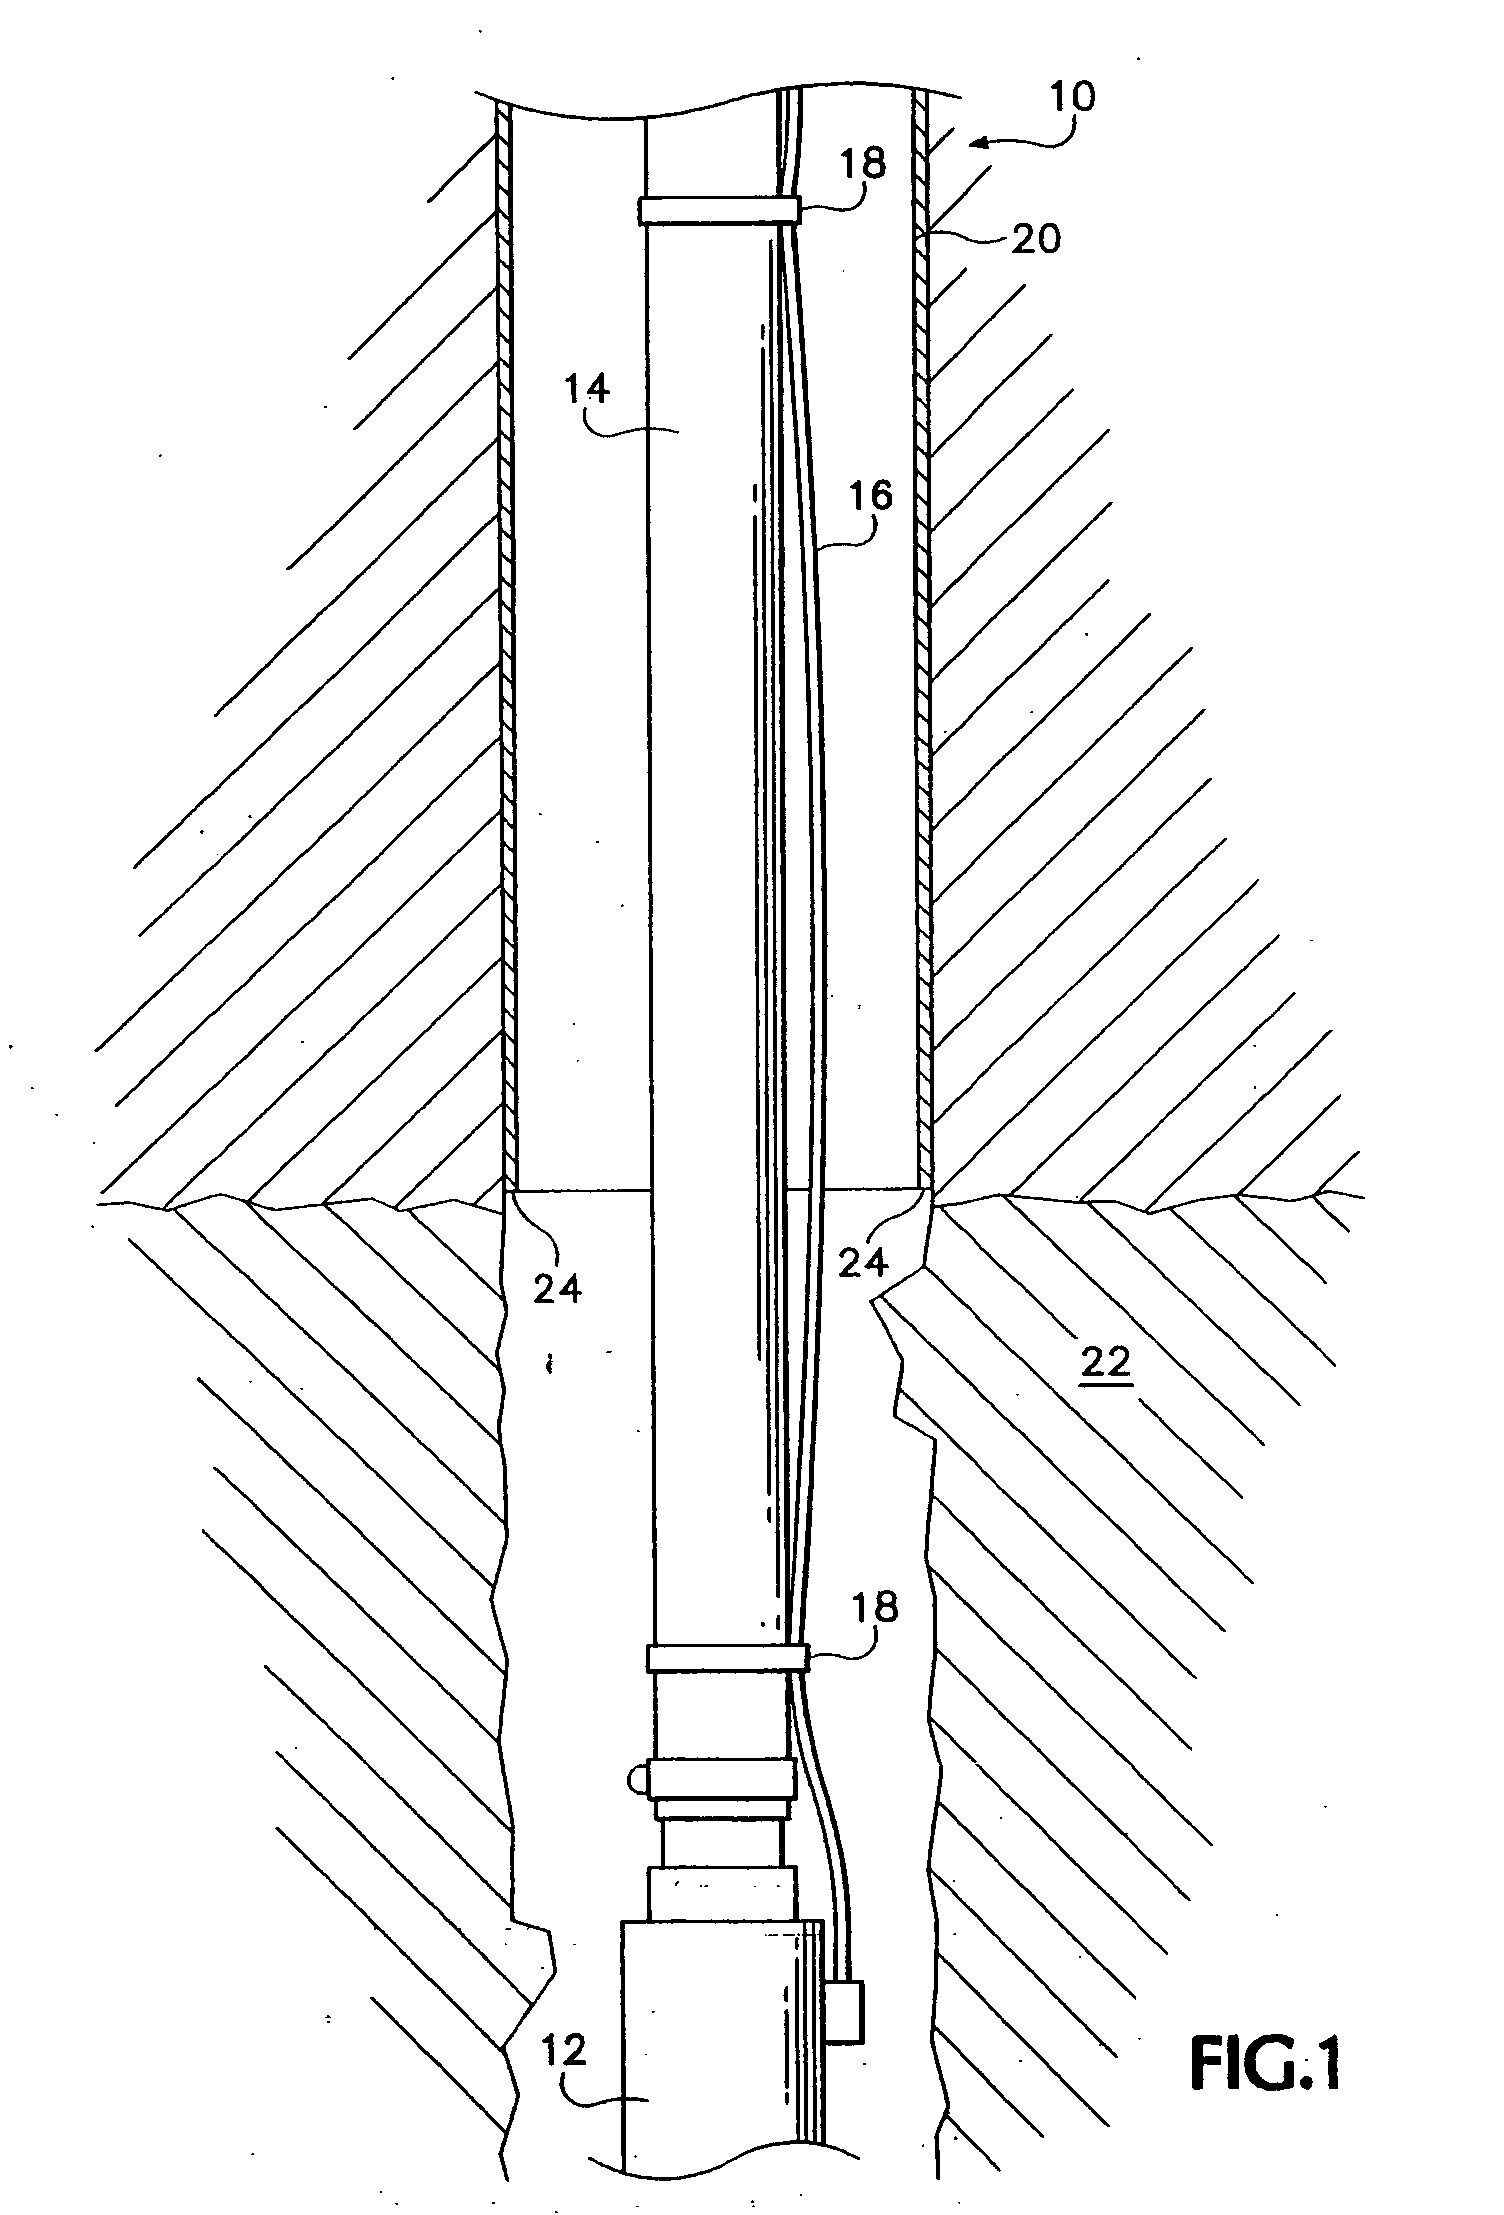 Method for installing a water well pump